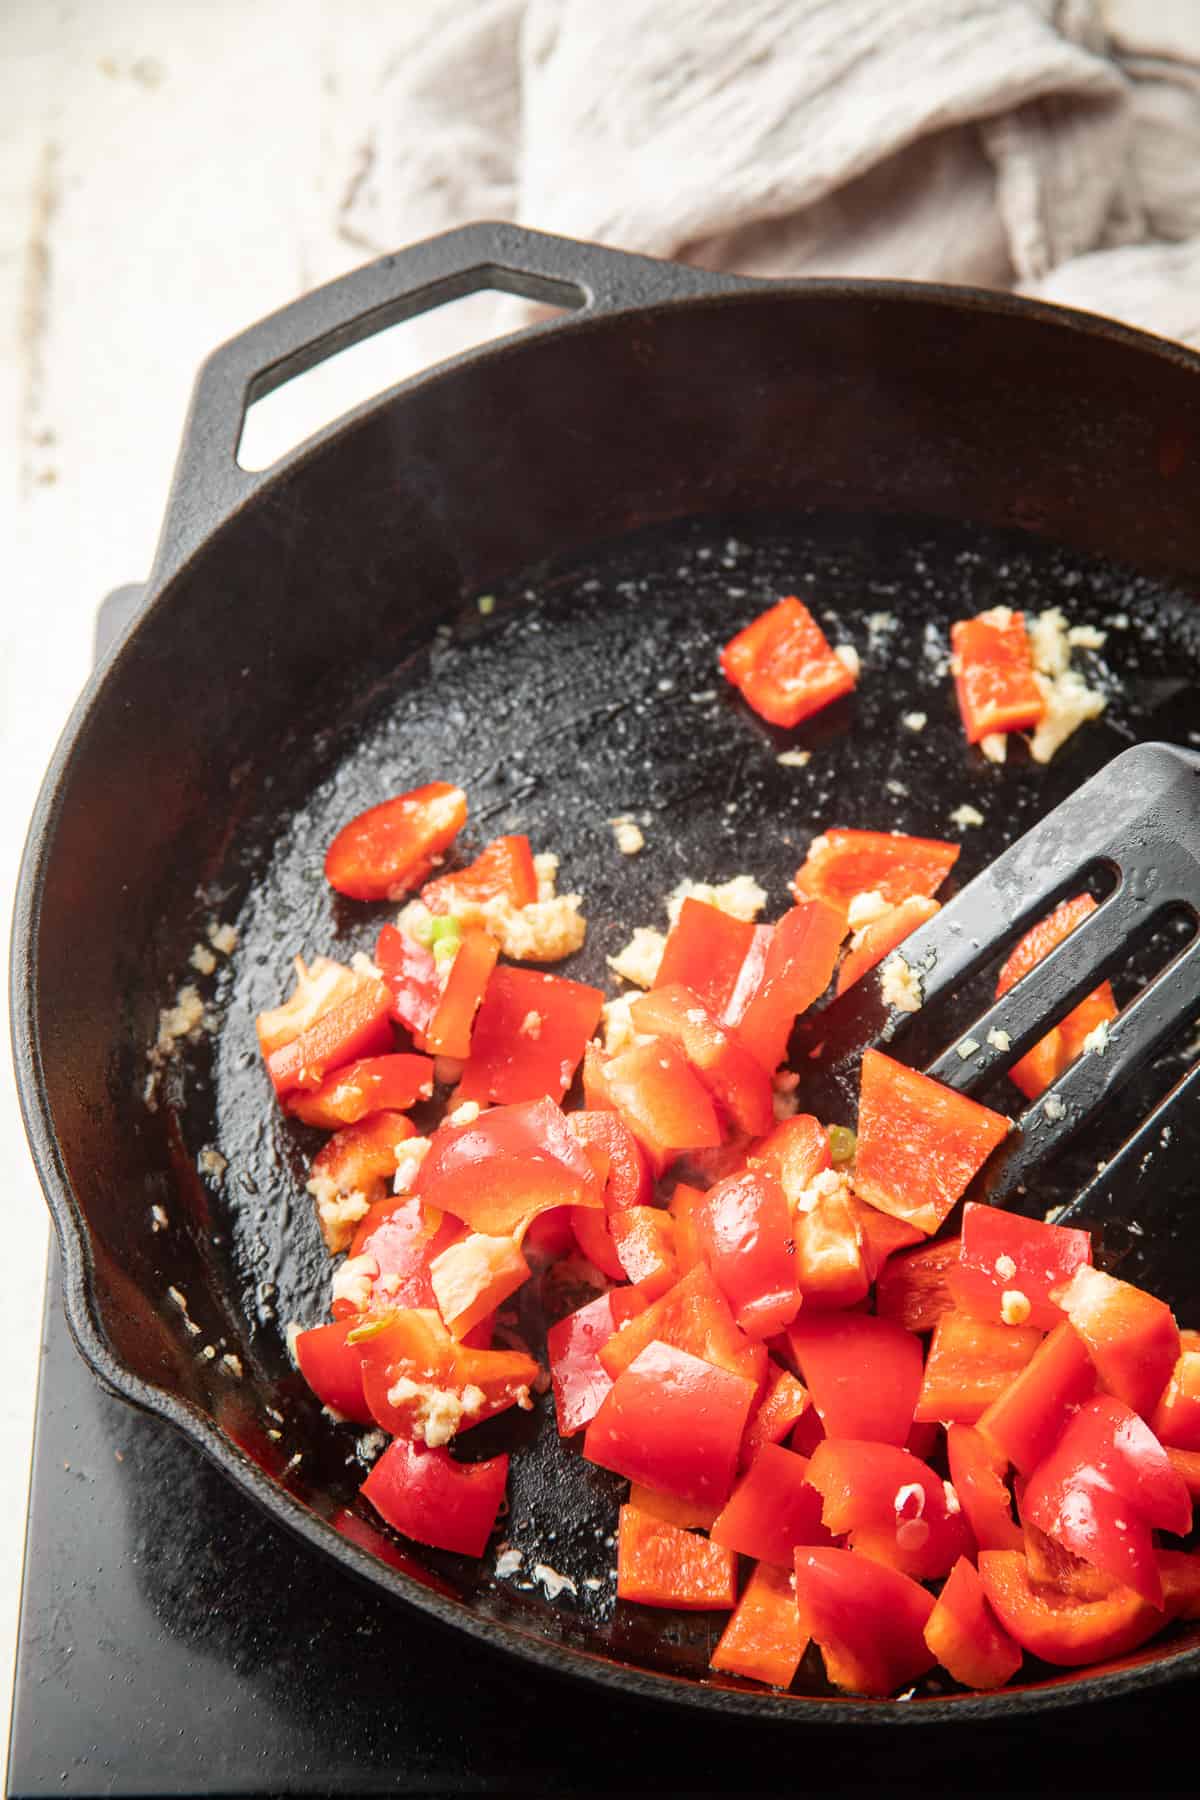 Red peppers, garlic, ginger and scallions cooking in a skillet.